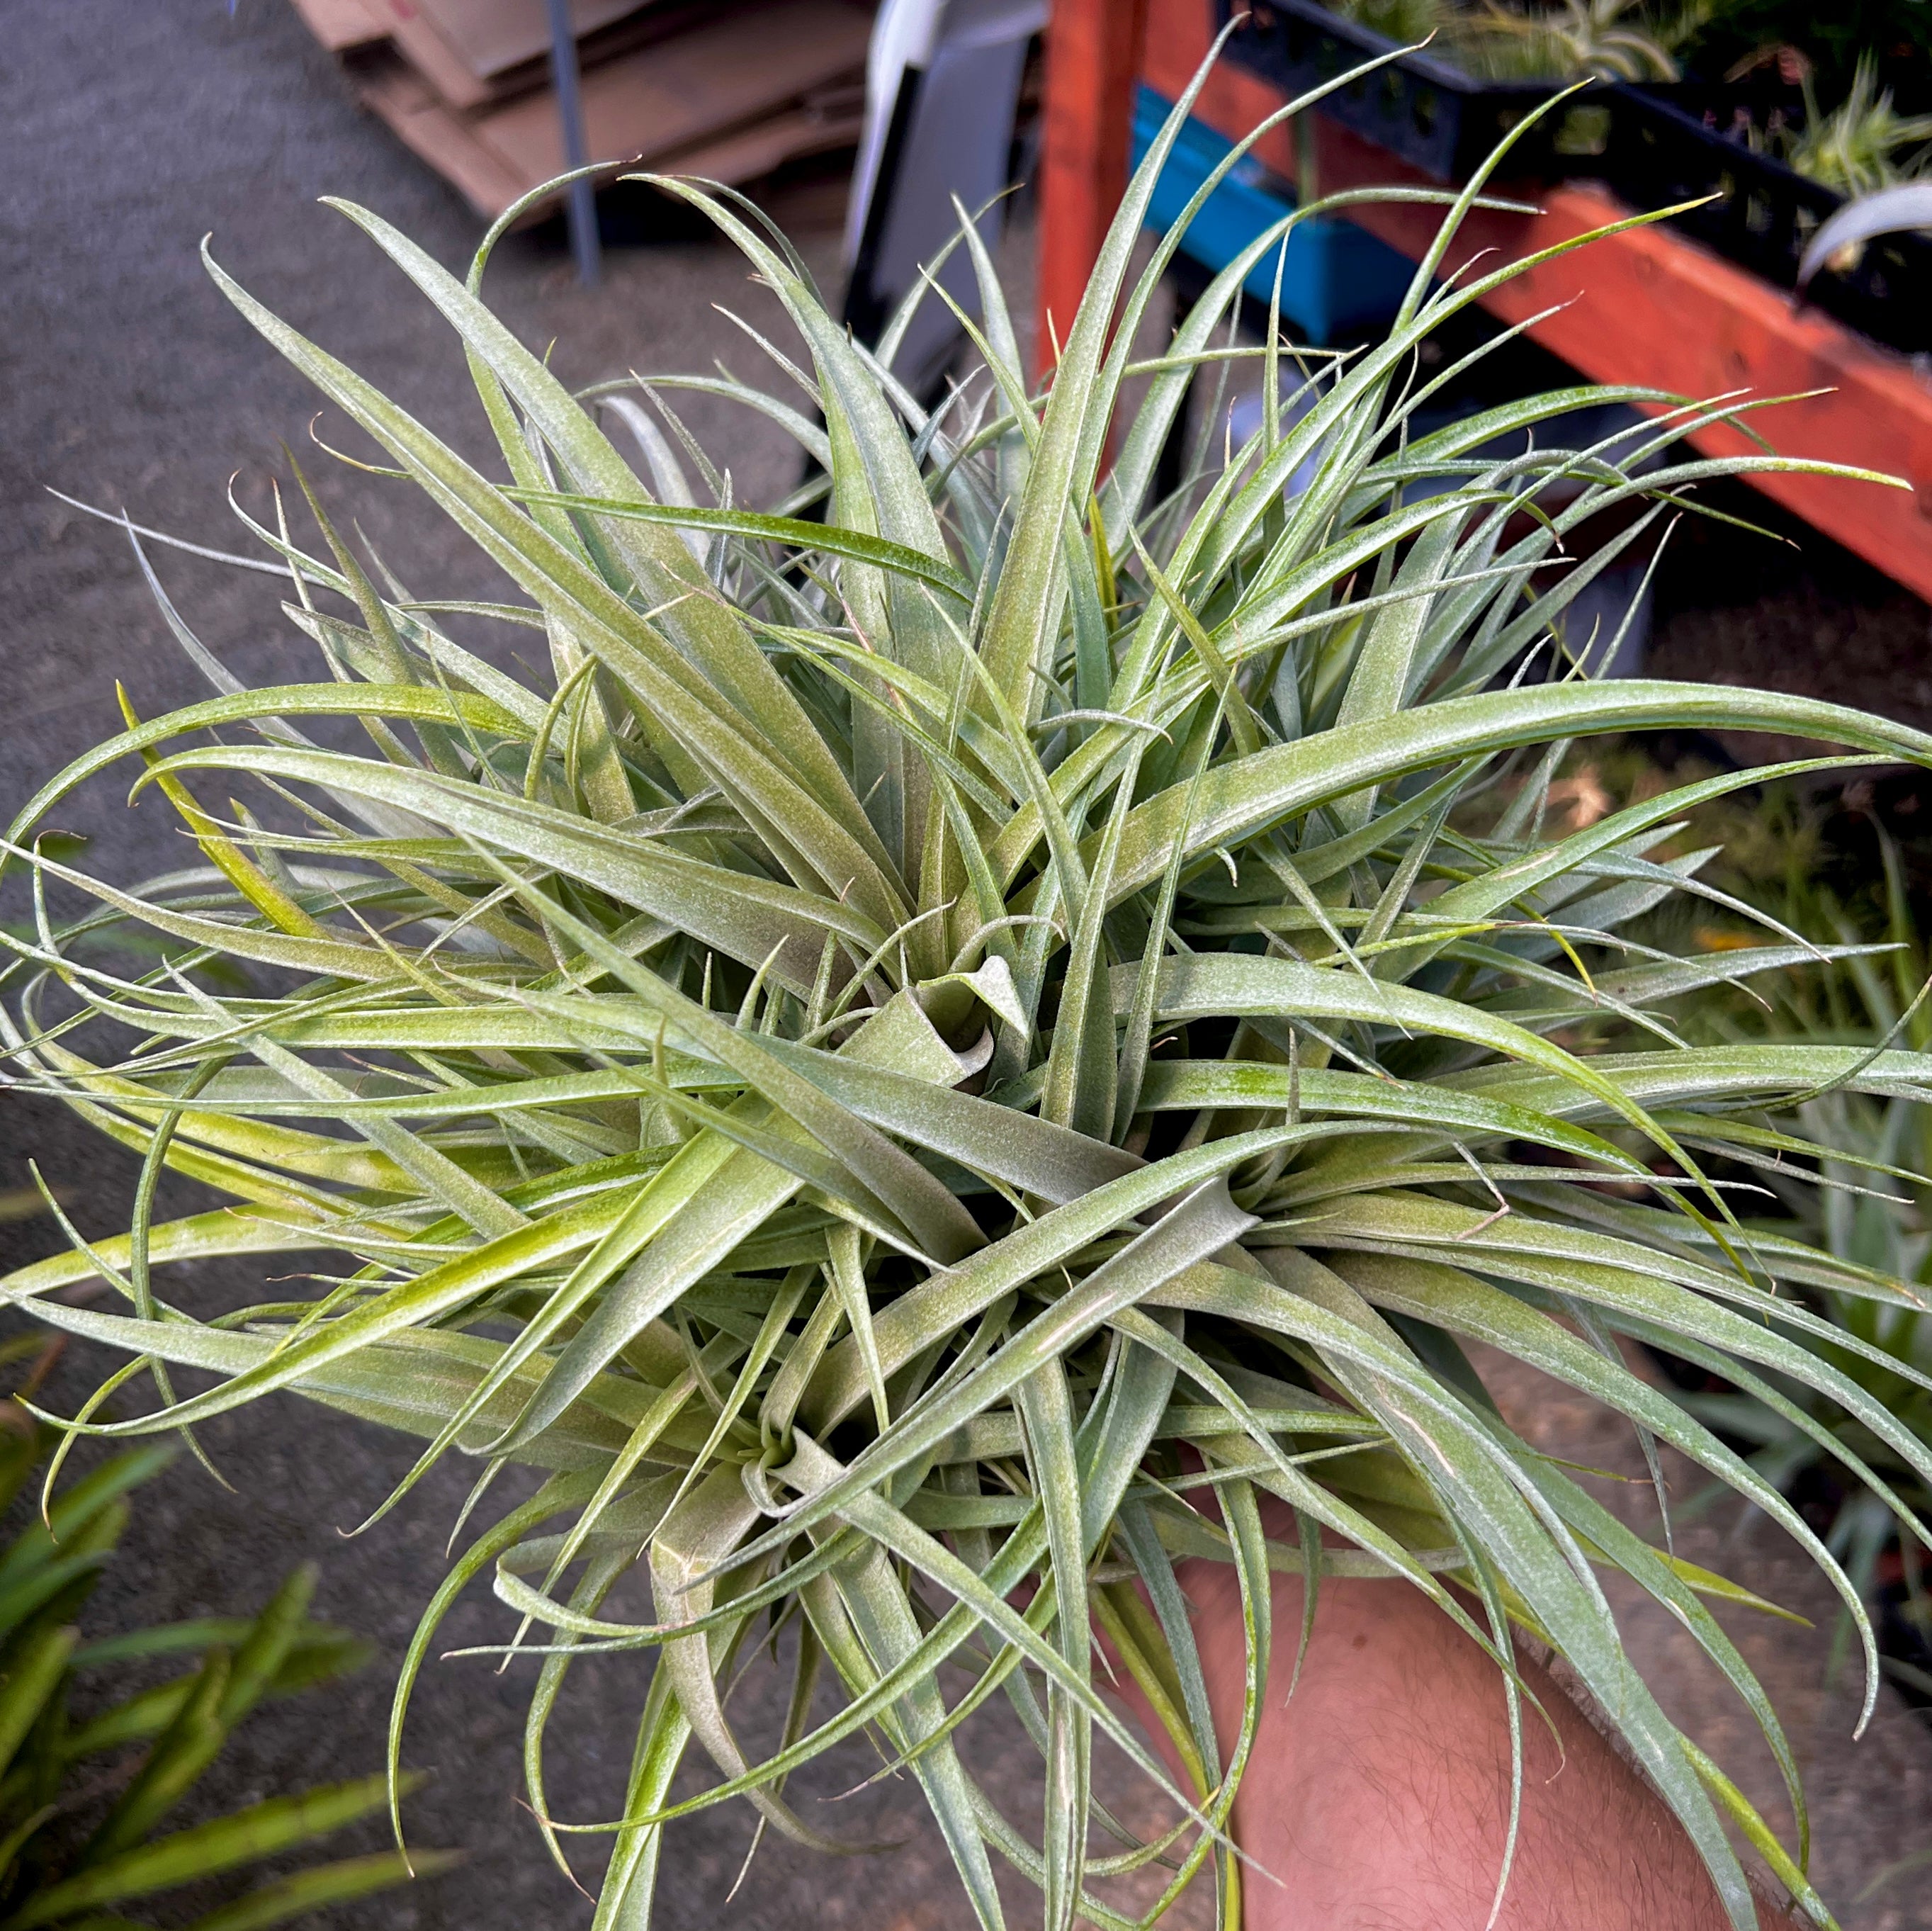 Tillandsia betty (Brachycaulos x xerographica) clump air plant with pups in hand